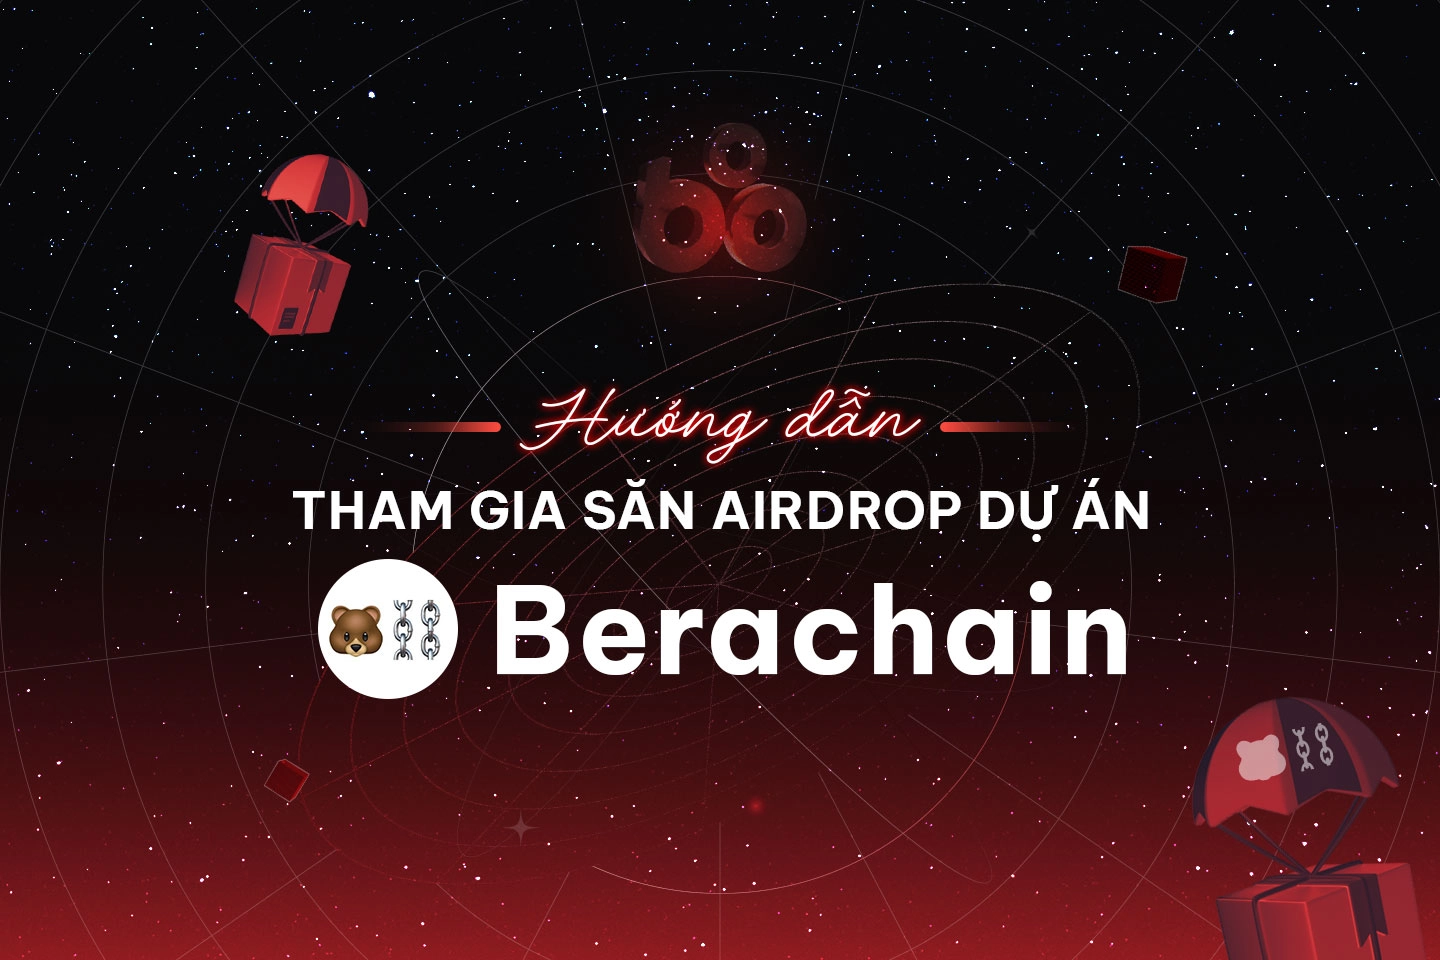 Berachain Unveils Artio Testnet, Offers Airdrop Opportunities for Early Users